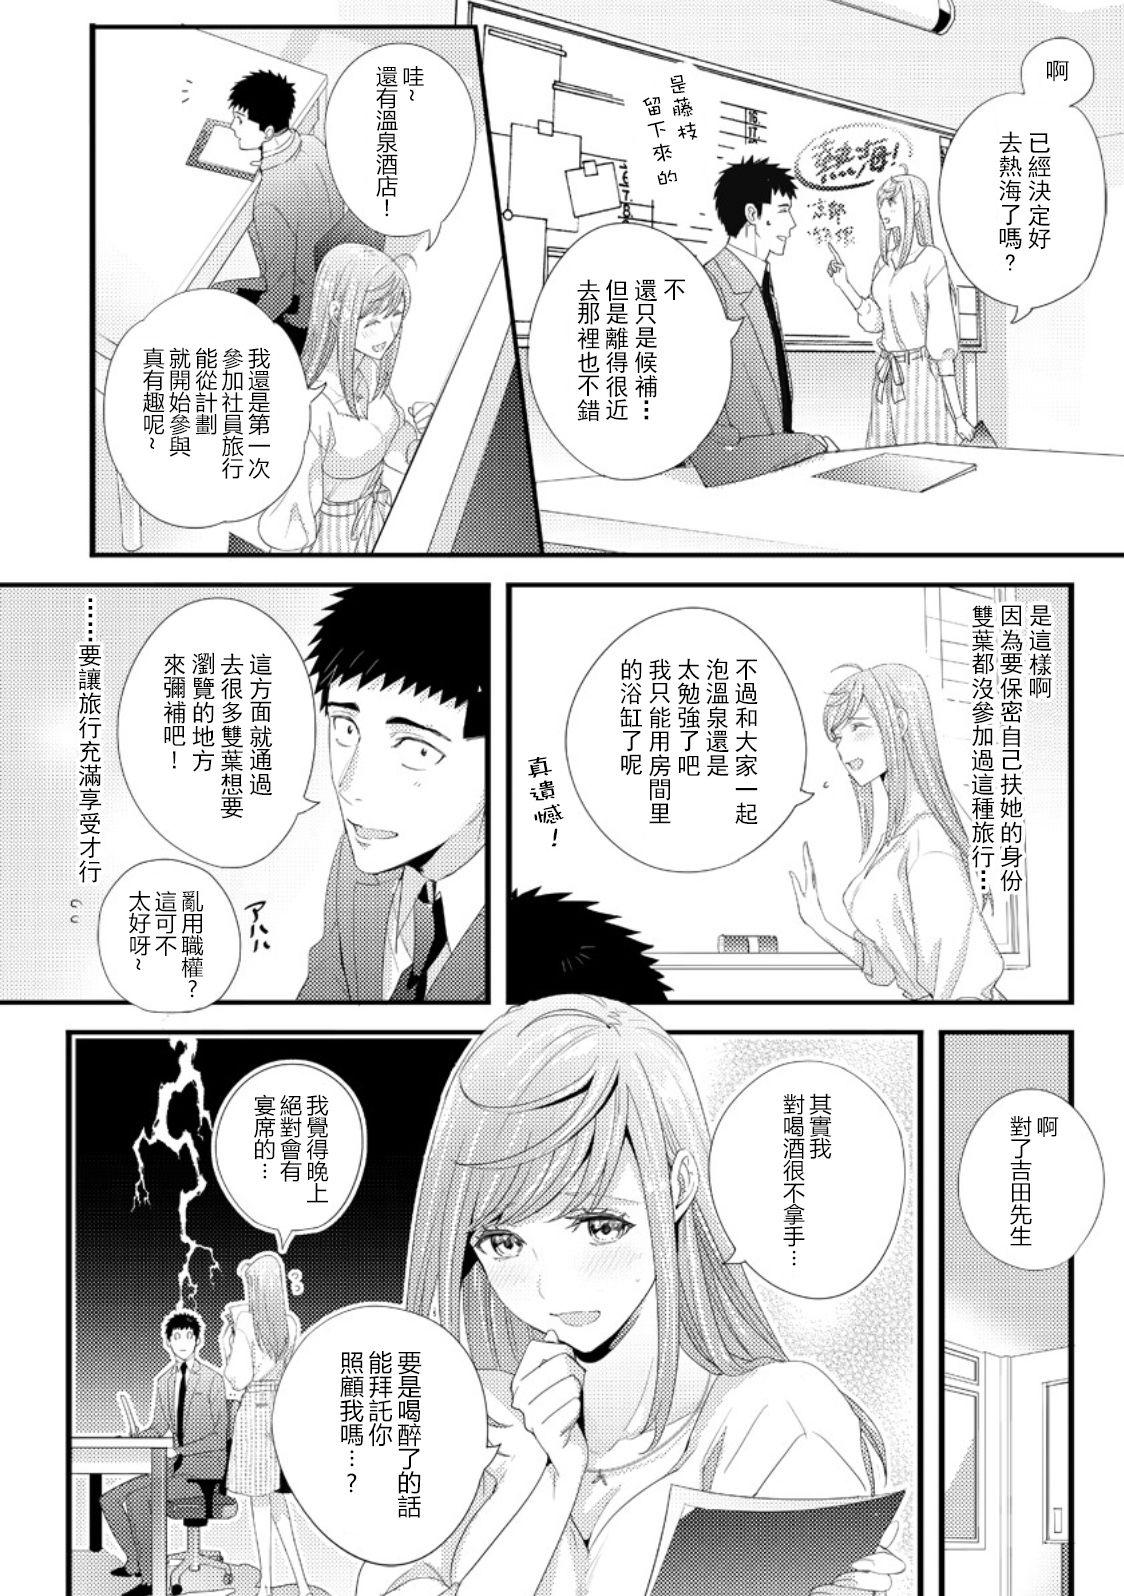 Please Let Me Hold You Futaba-San! Ch.1 5